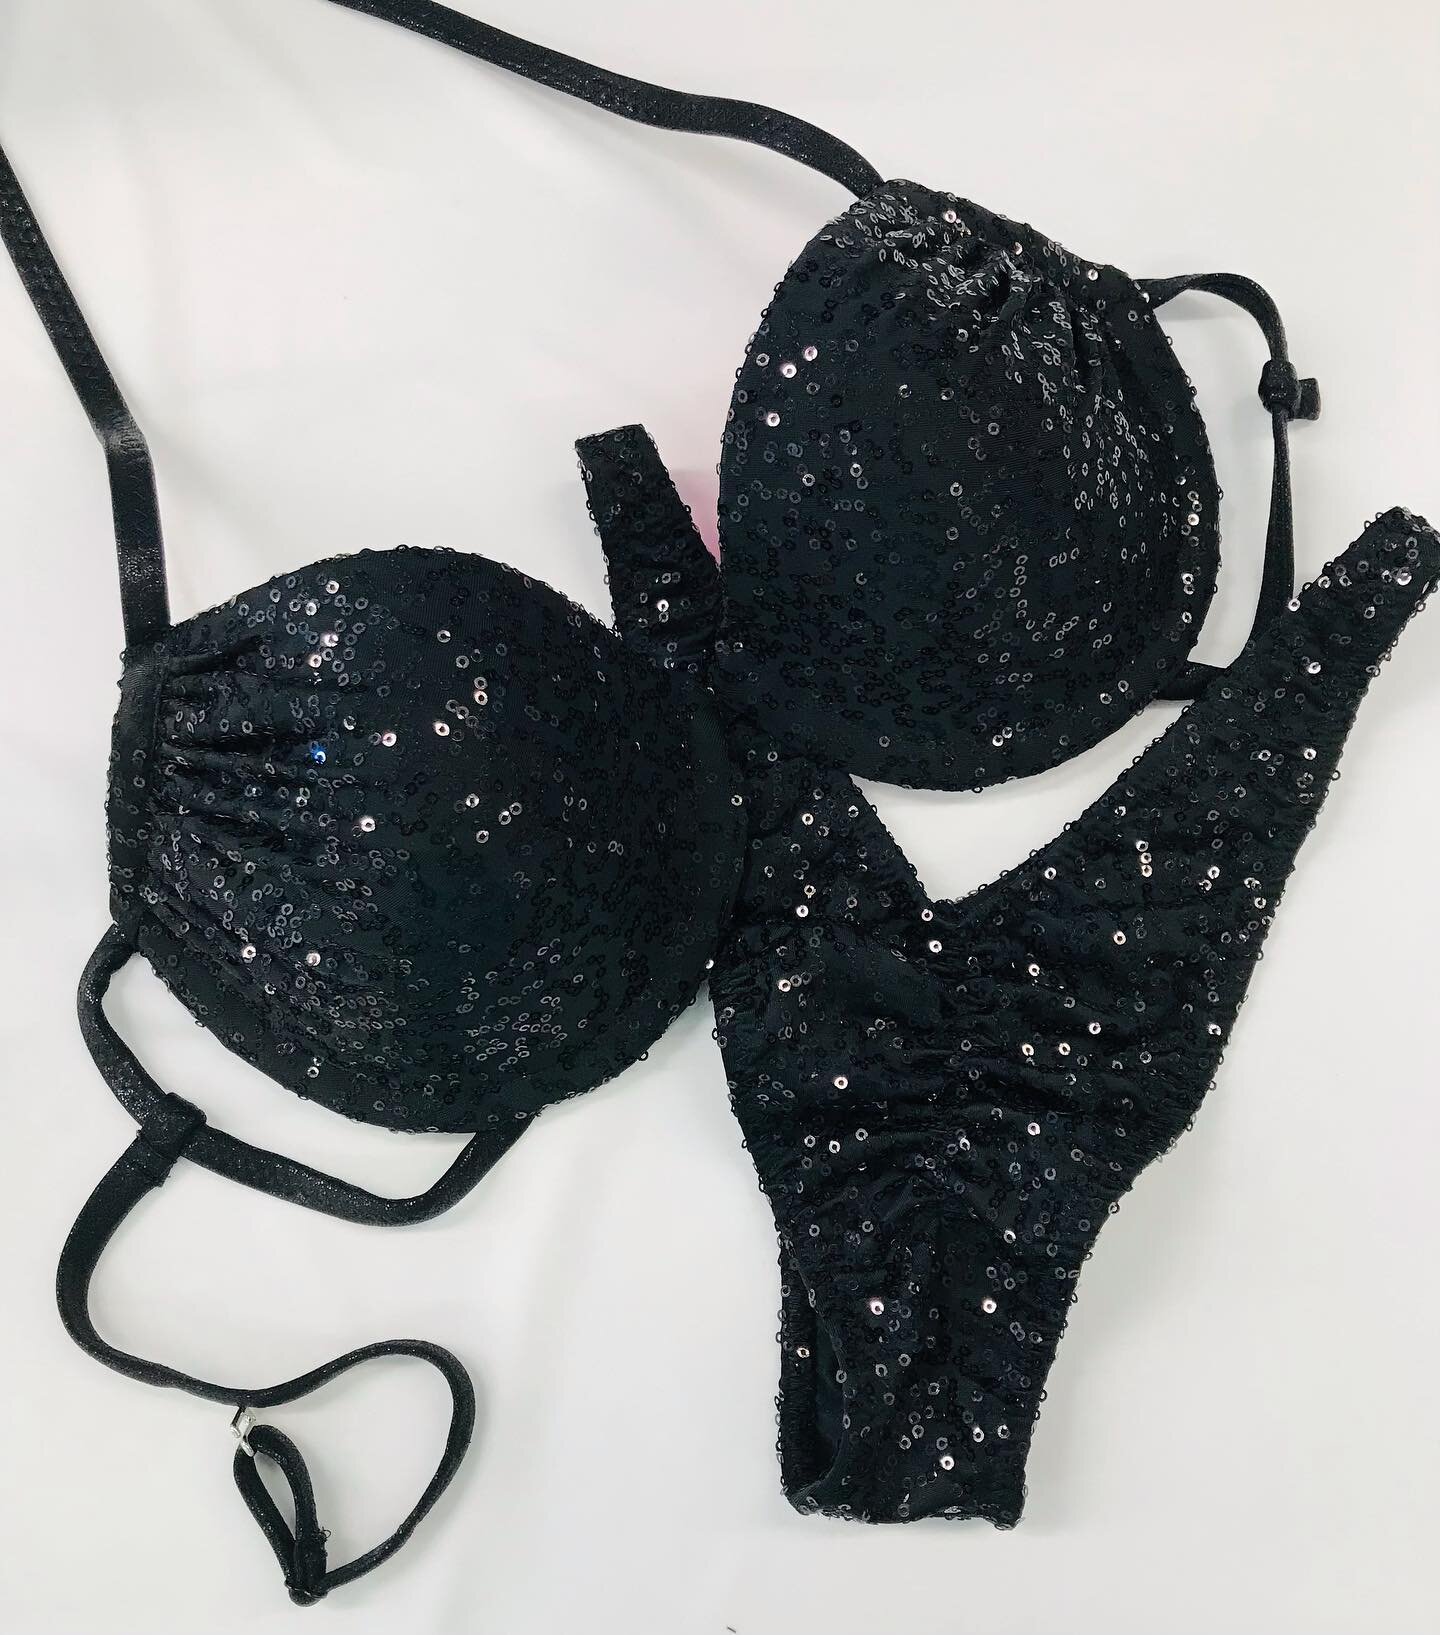 SEQUIN WELLNESS BIKINI style now available in 8 colours. Swipe to see all the colors available. Crystals can be added if you like as well. This is a new product that will be added to the website soon. If you would like more info on a suit like this p